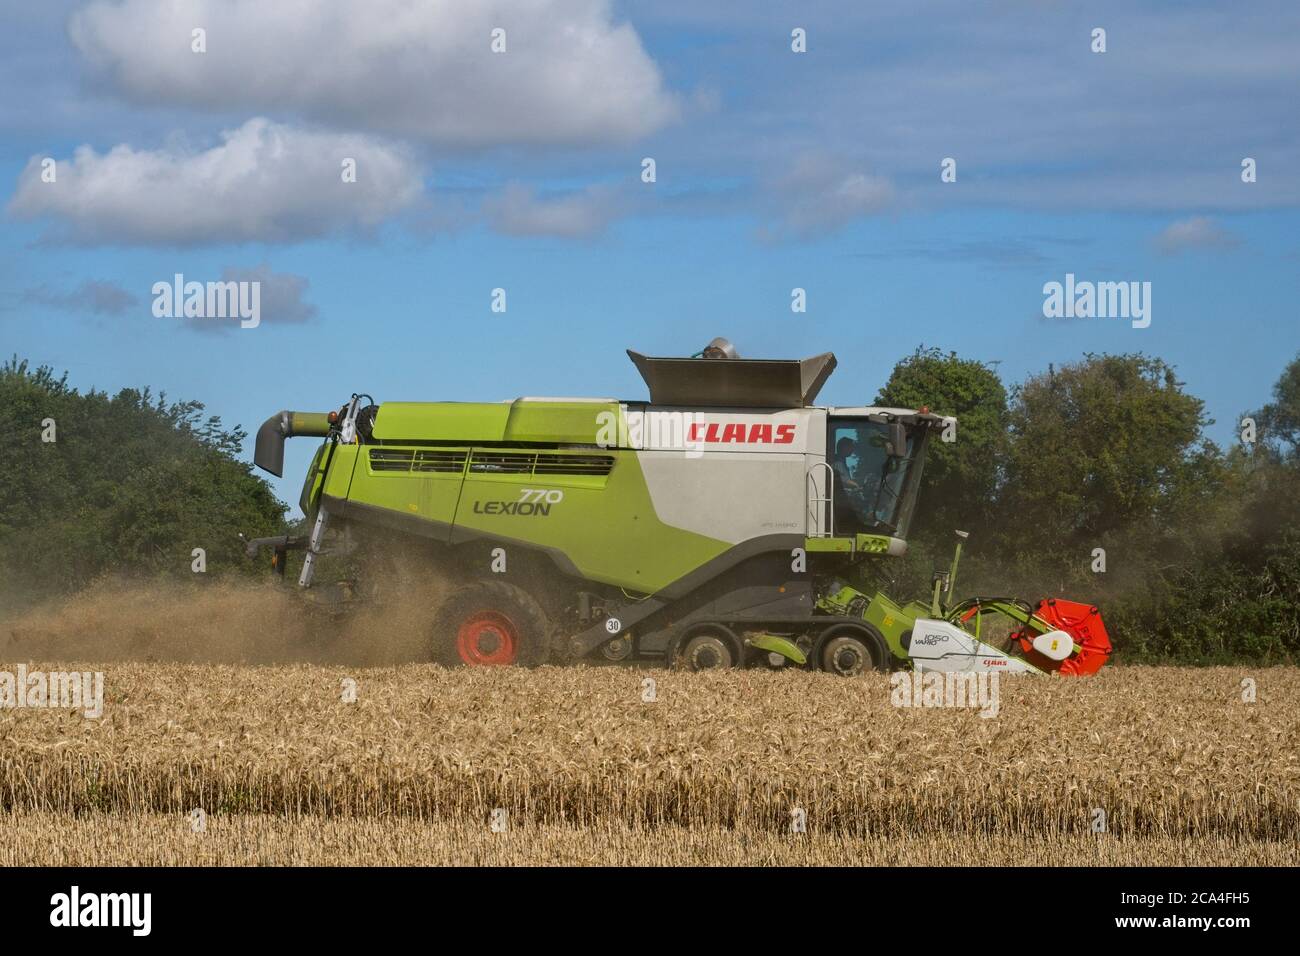 Winter Harvest combined harvester at work in field Dusty Sunny cloudy sky Fields Trees Landscape format Stock Photo